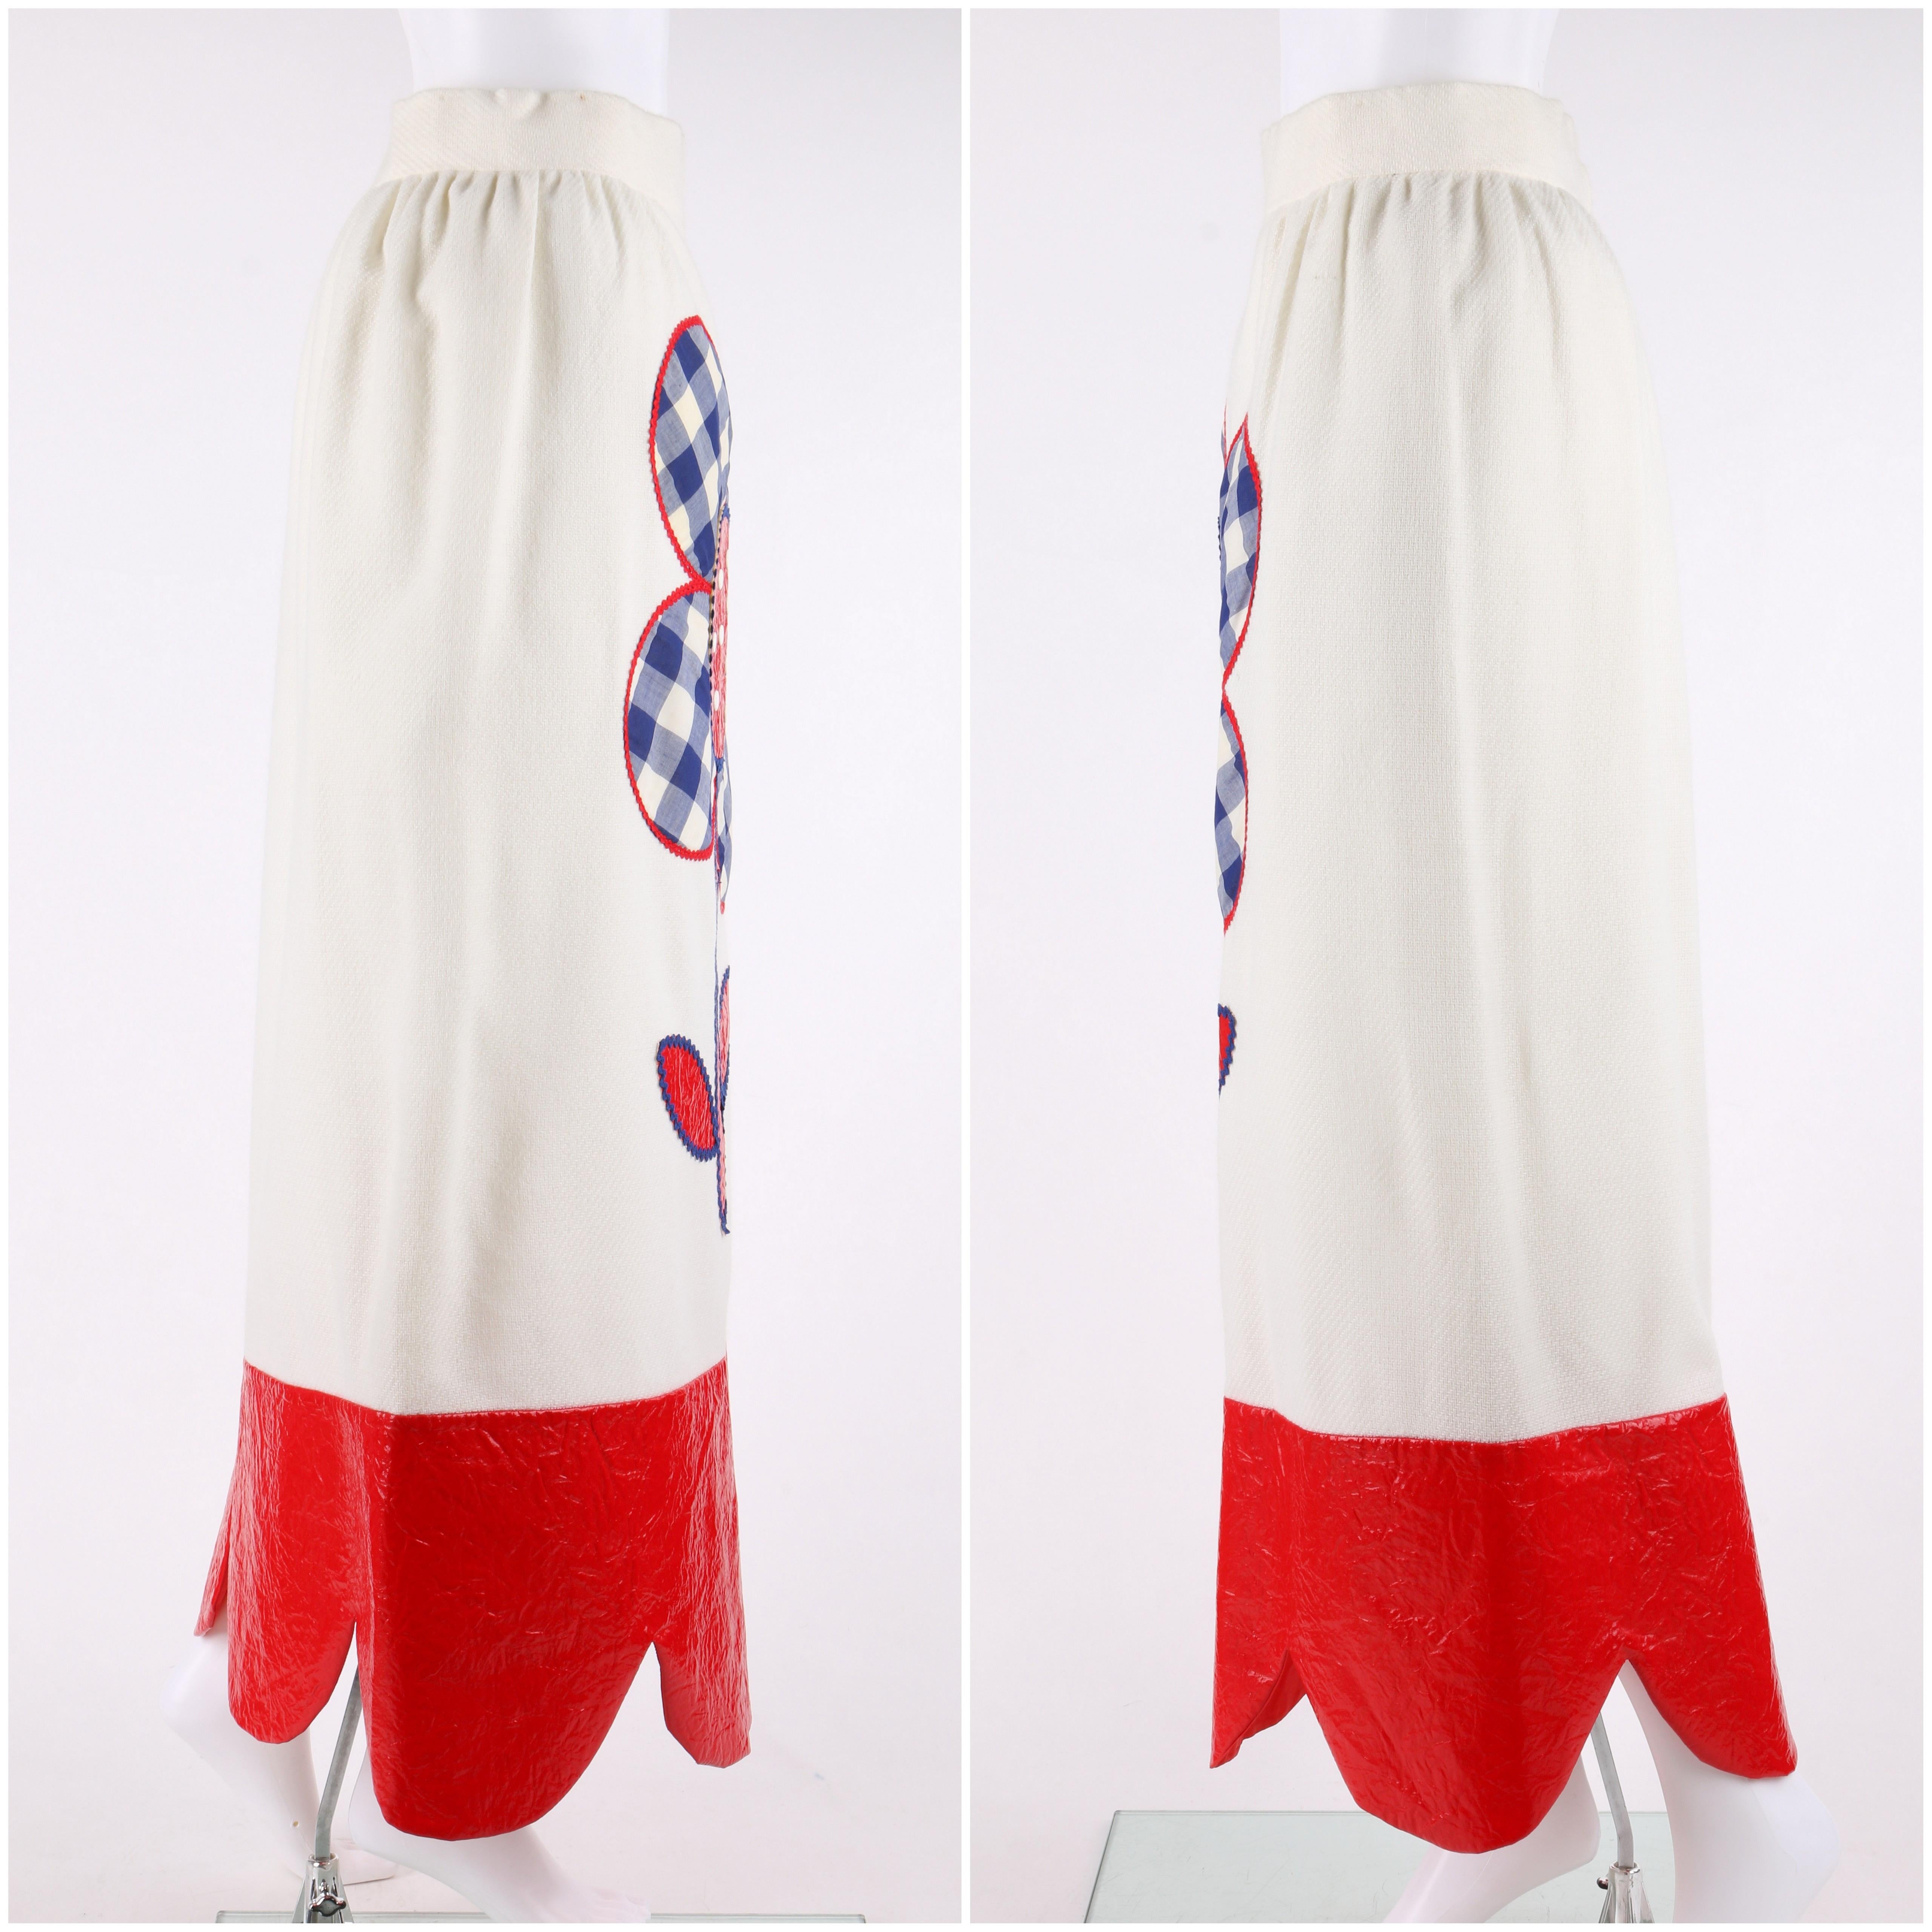 PATCHES ST LOUIS c.1970’s 3 Pc Red White Blue Gingham Floral Top Skirt Belt Set For Sale 1